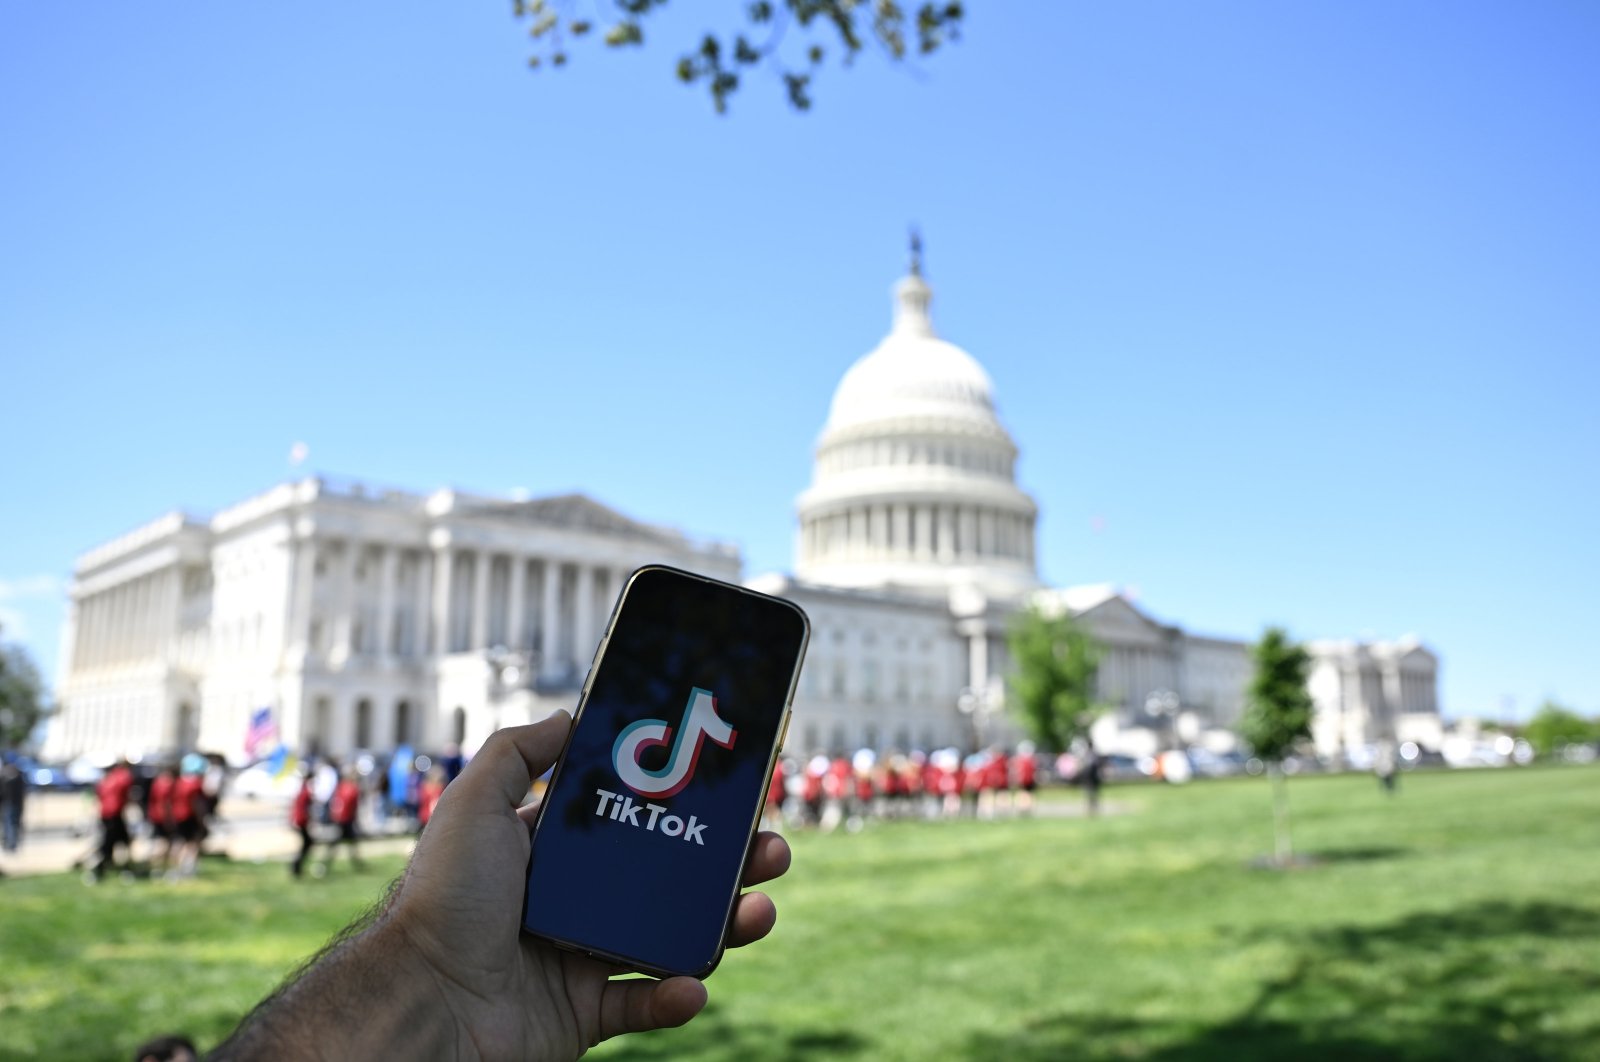 The TikTok app logo is seen on a smartphone in front of the U.S. Capitol building, Washington, U.S., April 20, 2024. (AA Photo)